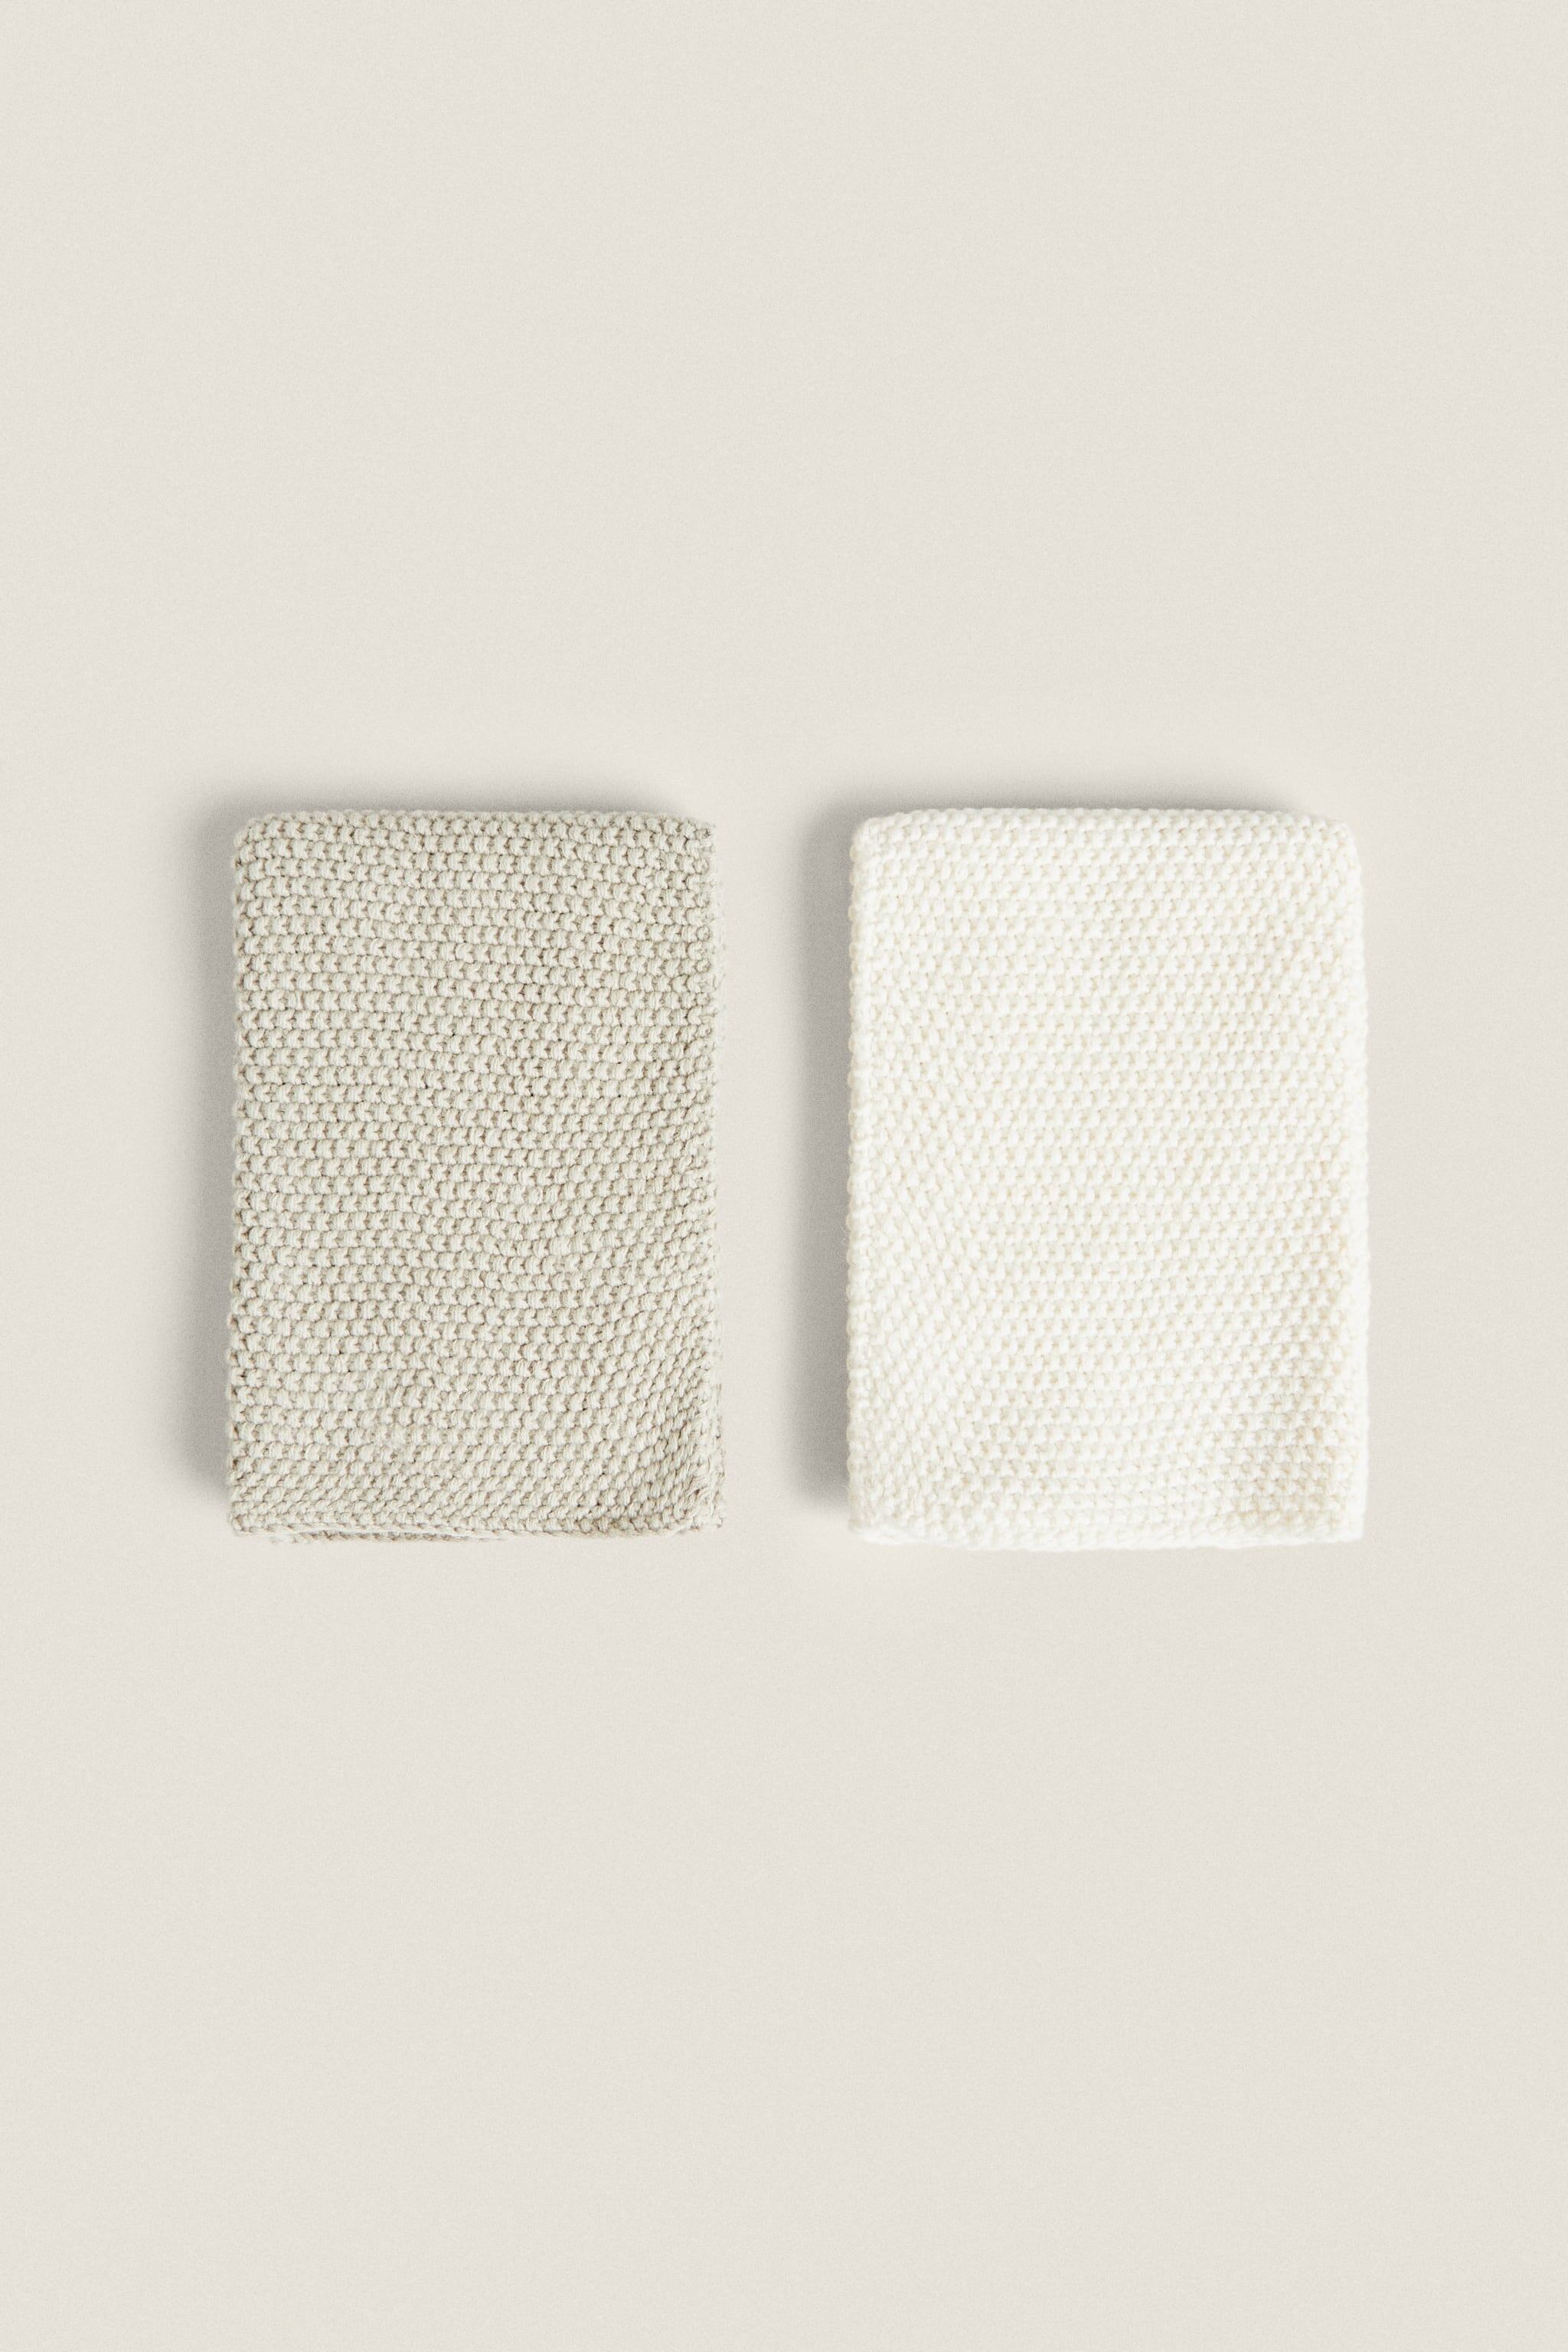 KNIT KITCHEN TOWELS (PACK OF 2)